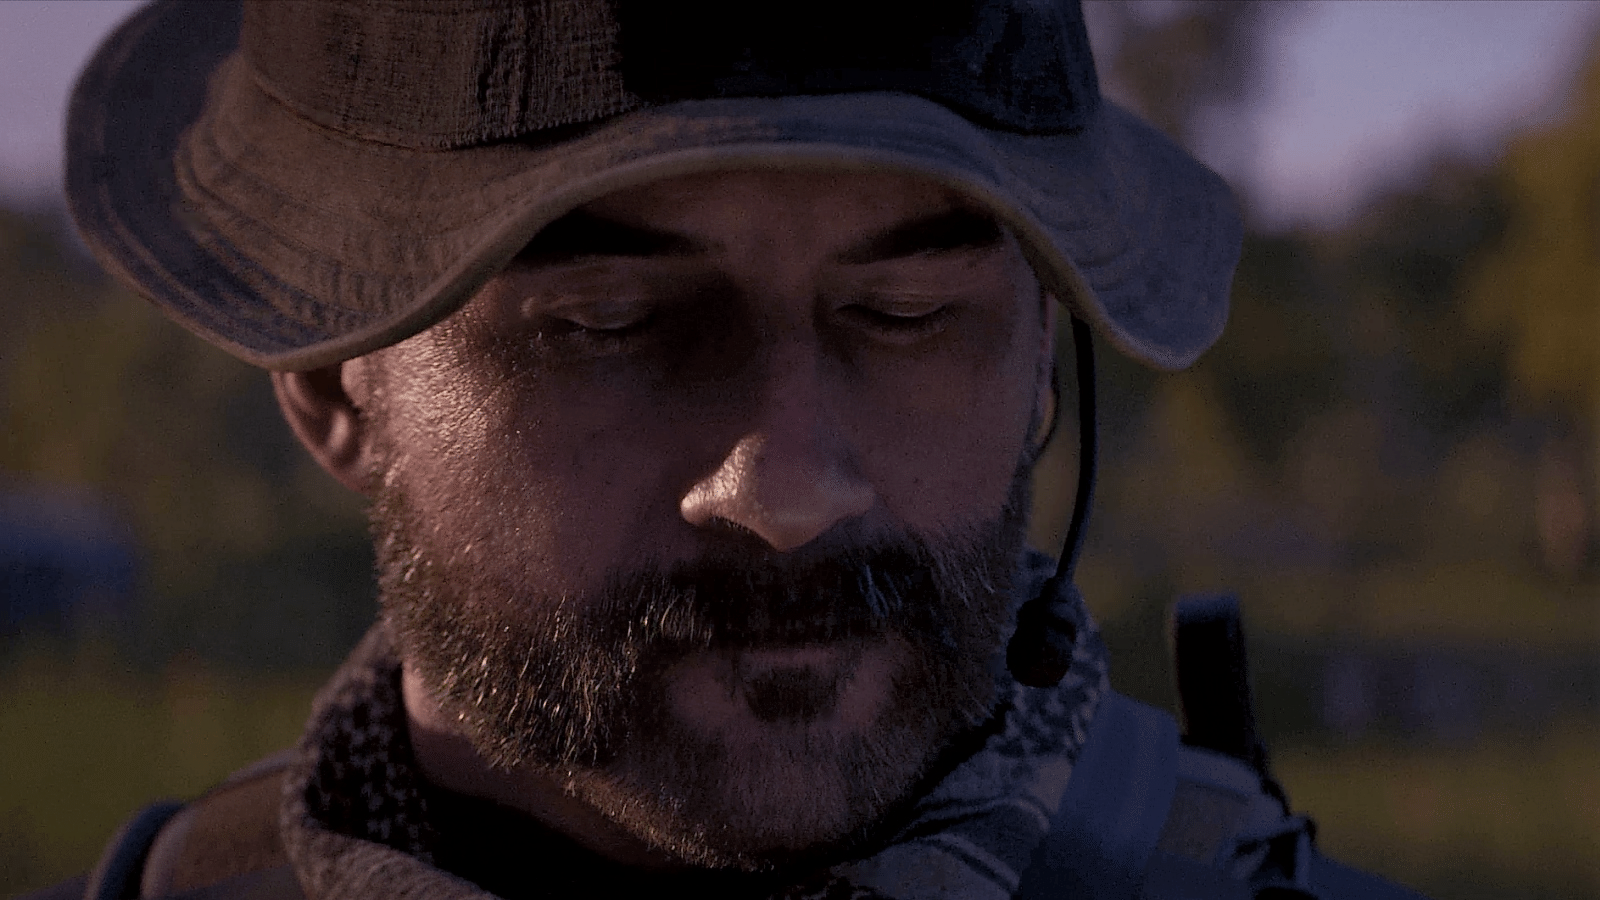 Call of Duty' Meme Offers a Hilarious Take on Captain Price's Backstory